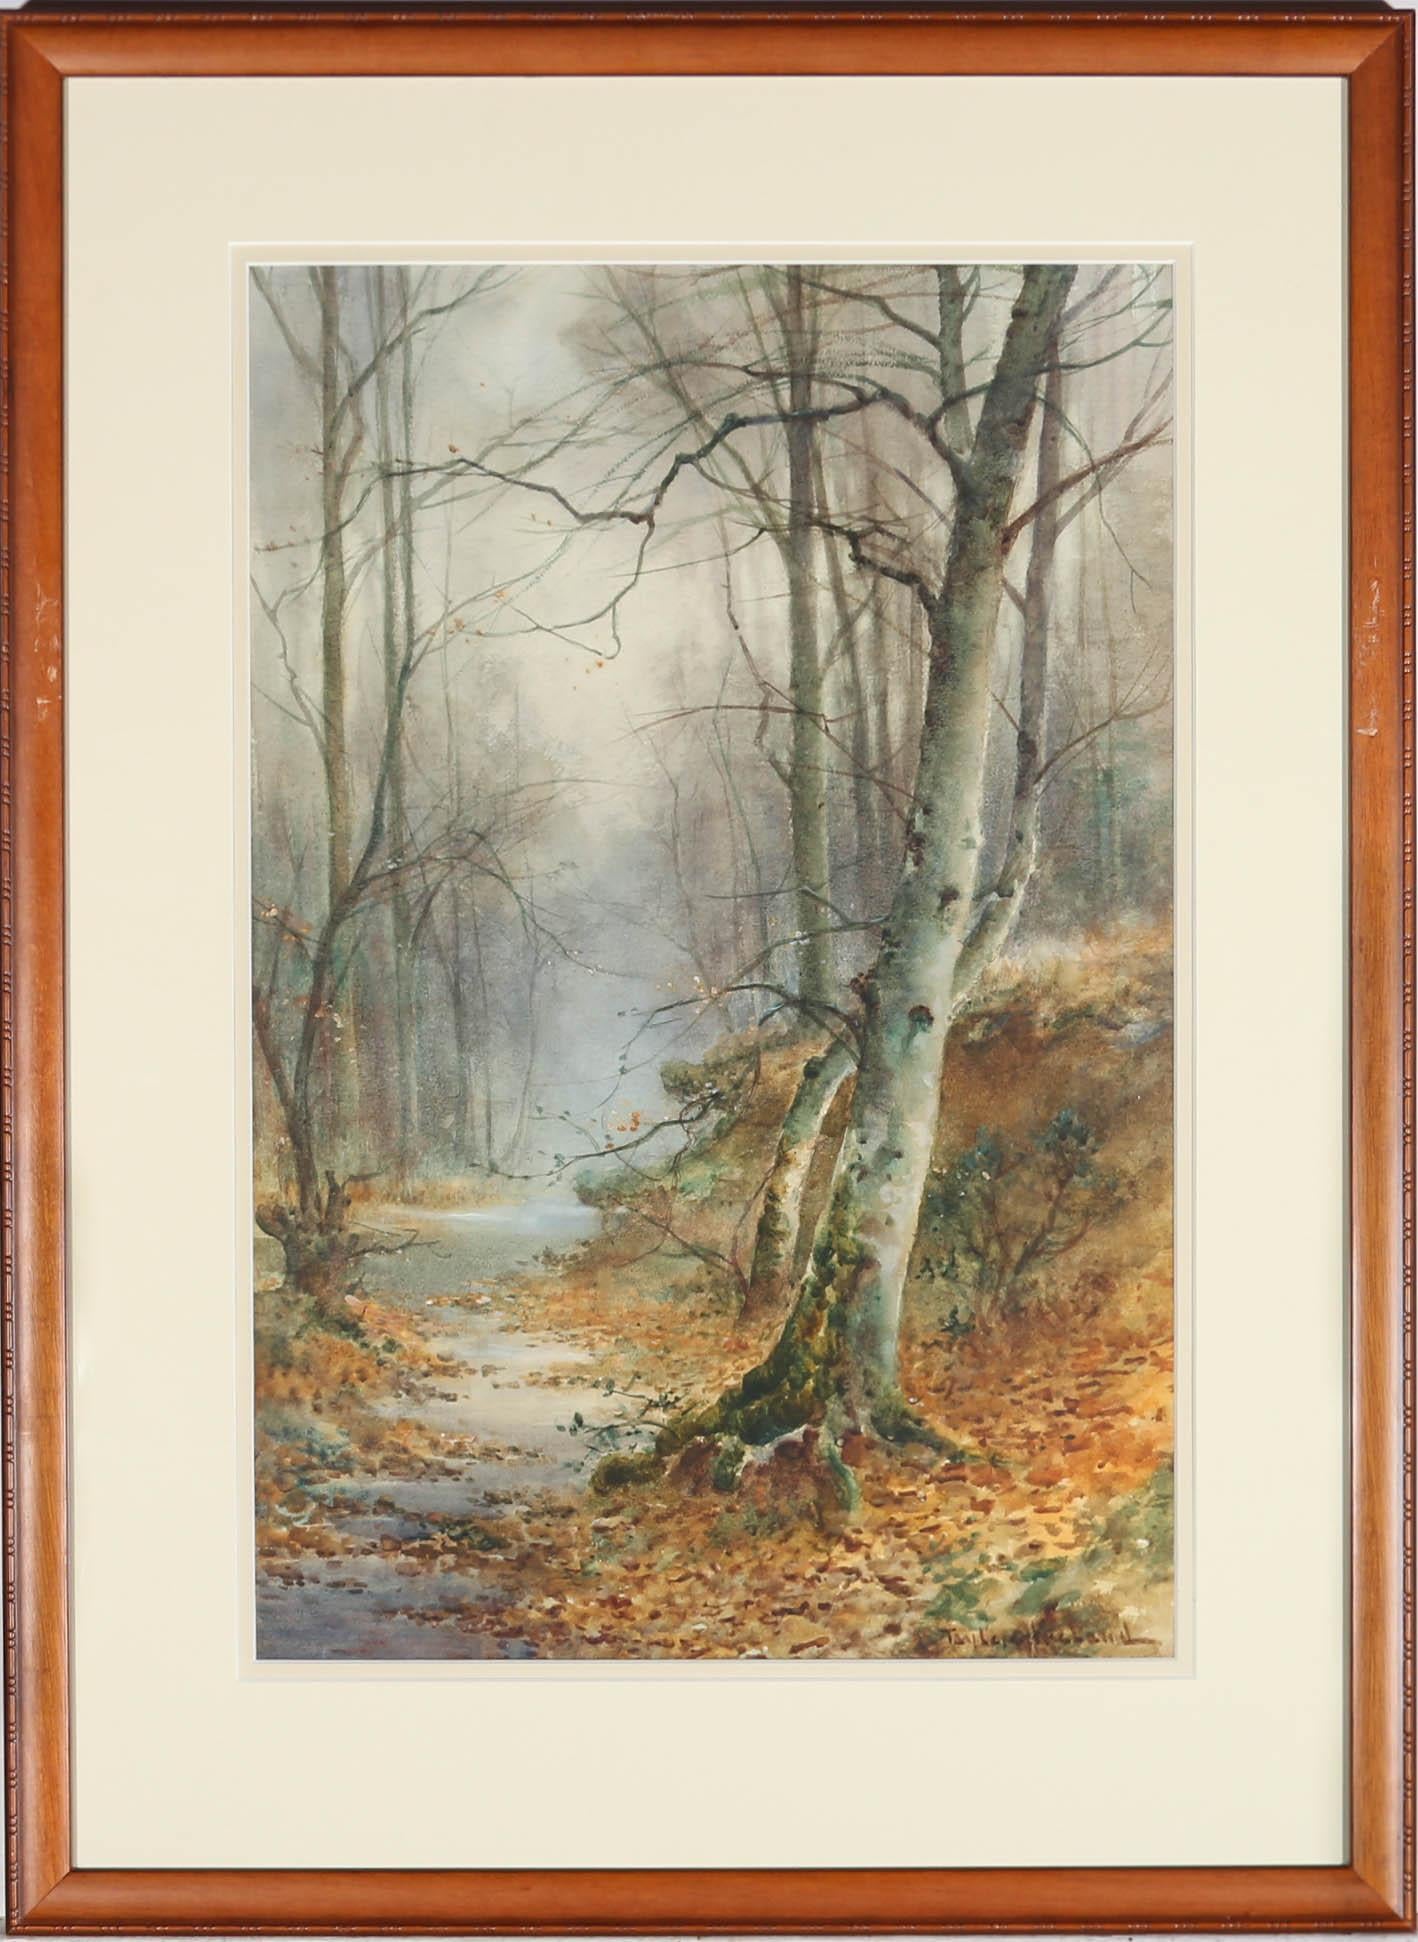 A fine watercolour study of a woodland dell, painted by British artist Thomas Ireland (fl.1880-1927). Here Ireland has captured an atmospheric scene of winter birch weeping over a quiet stream. The painting is signed to the lower right-hand corner.